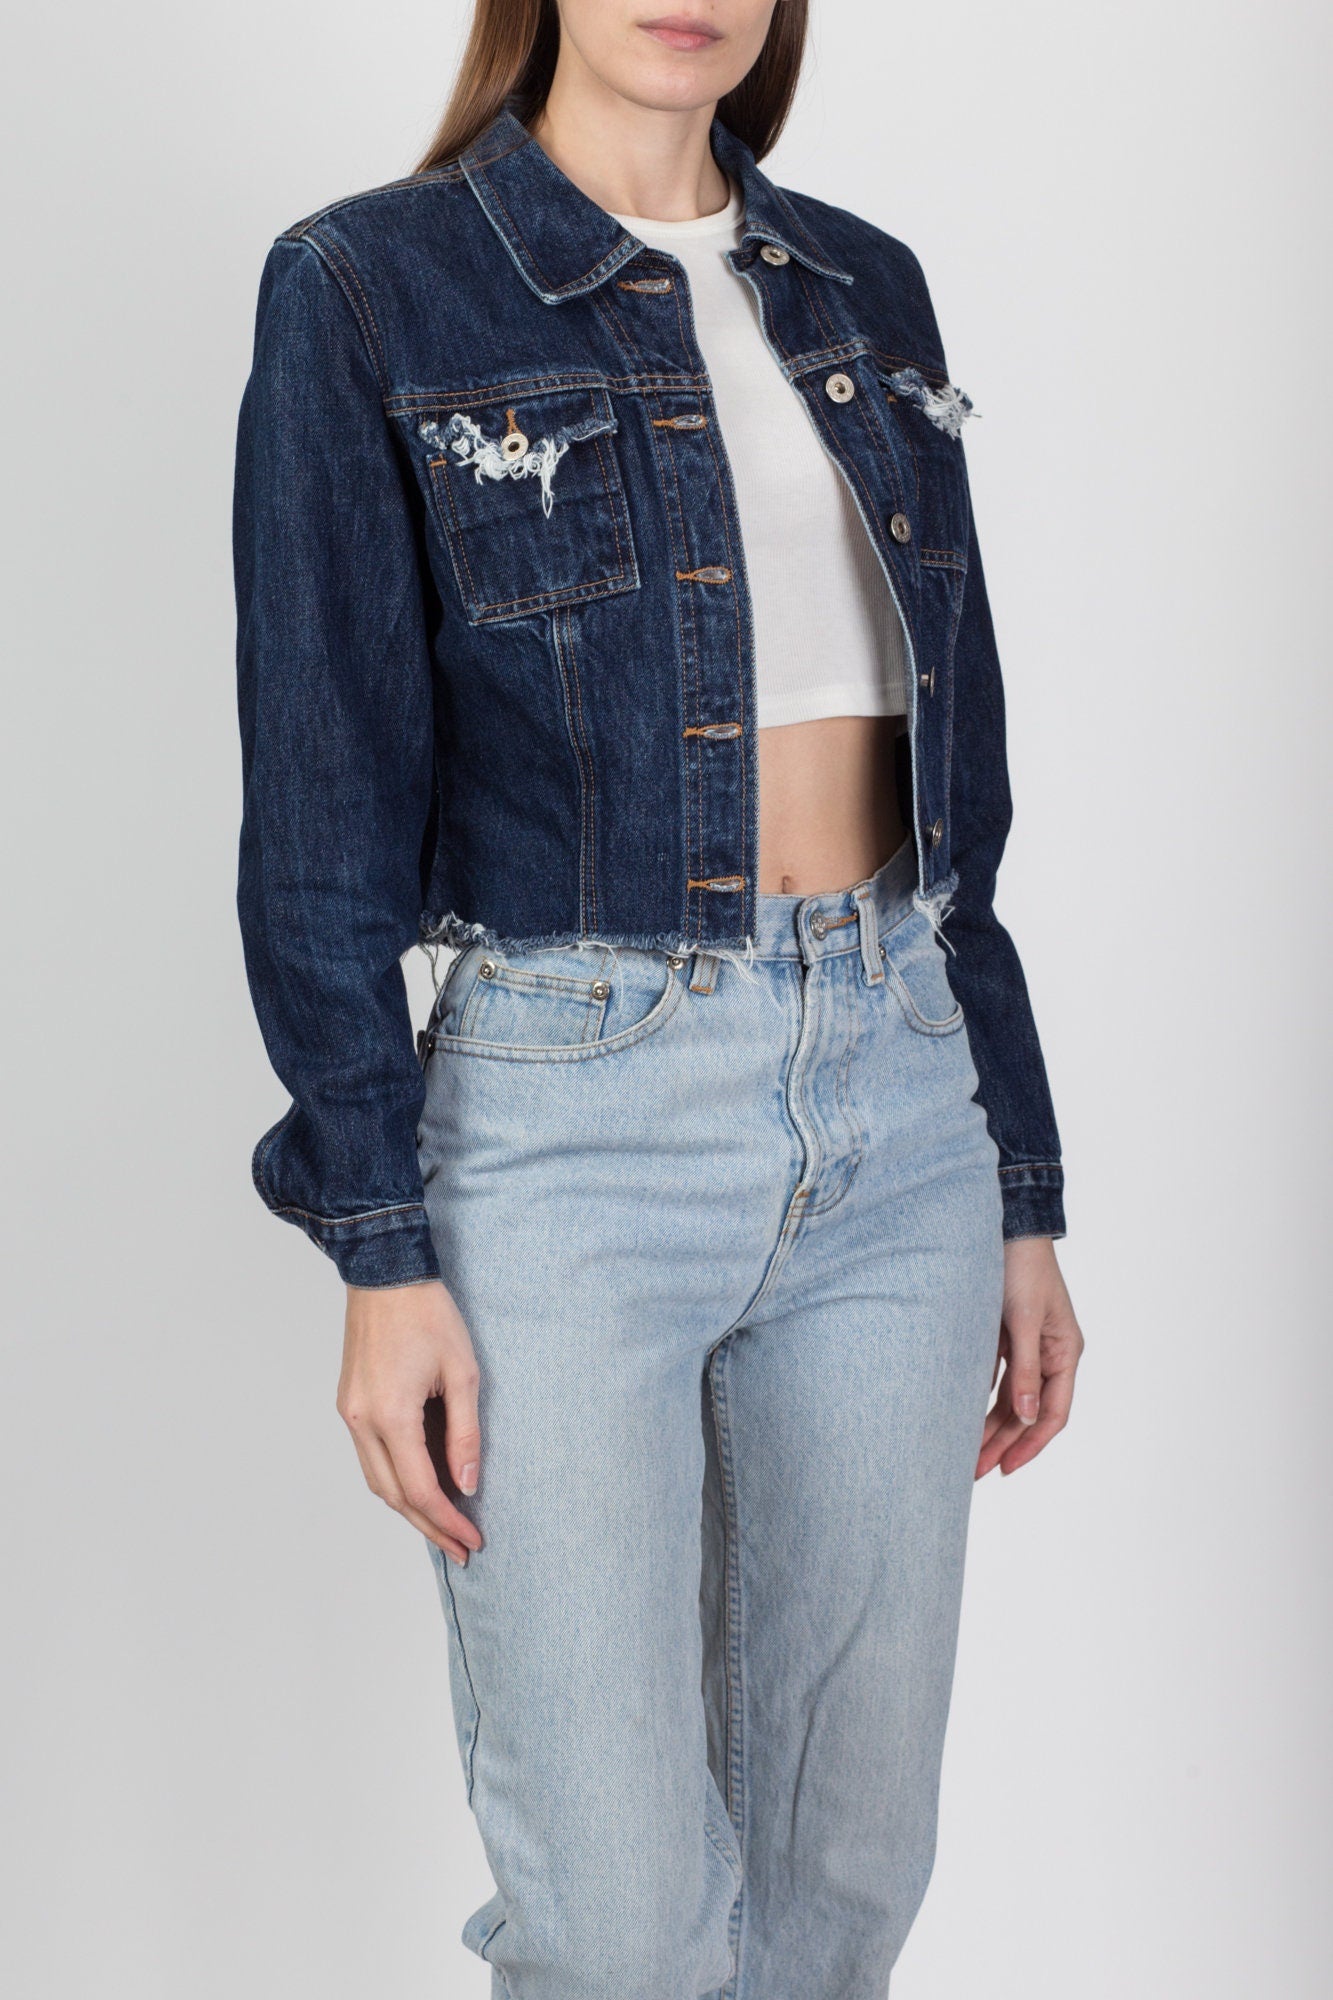 MISS MOLY Women's Cropped Denim Jacket Frayed Washed Button Up Casual Jean  Jacket Vest w 2 Side Pockets at Amazon Women's Coats Shop